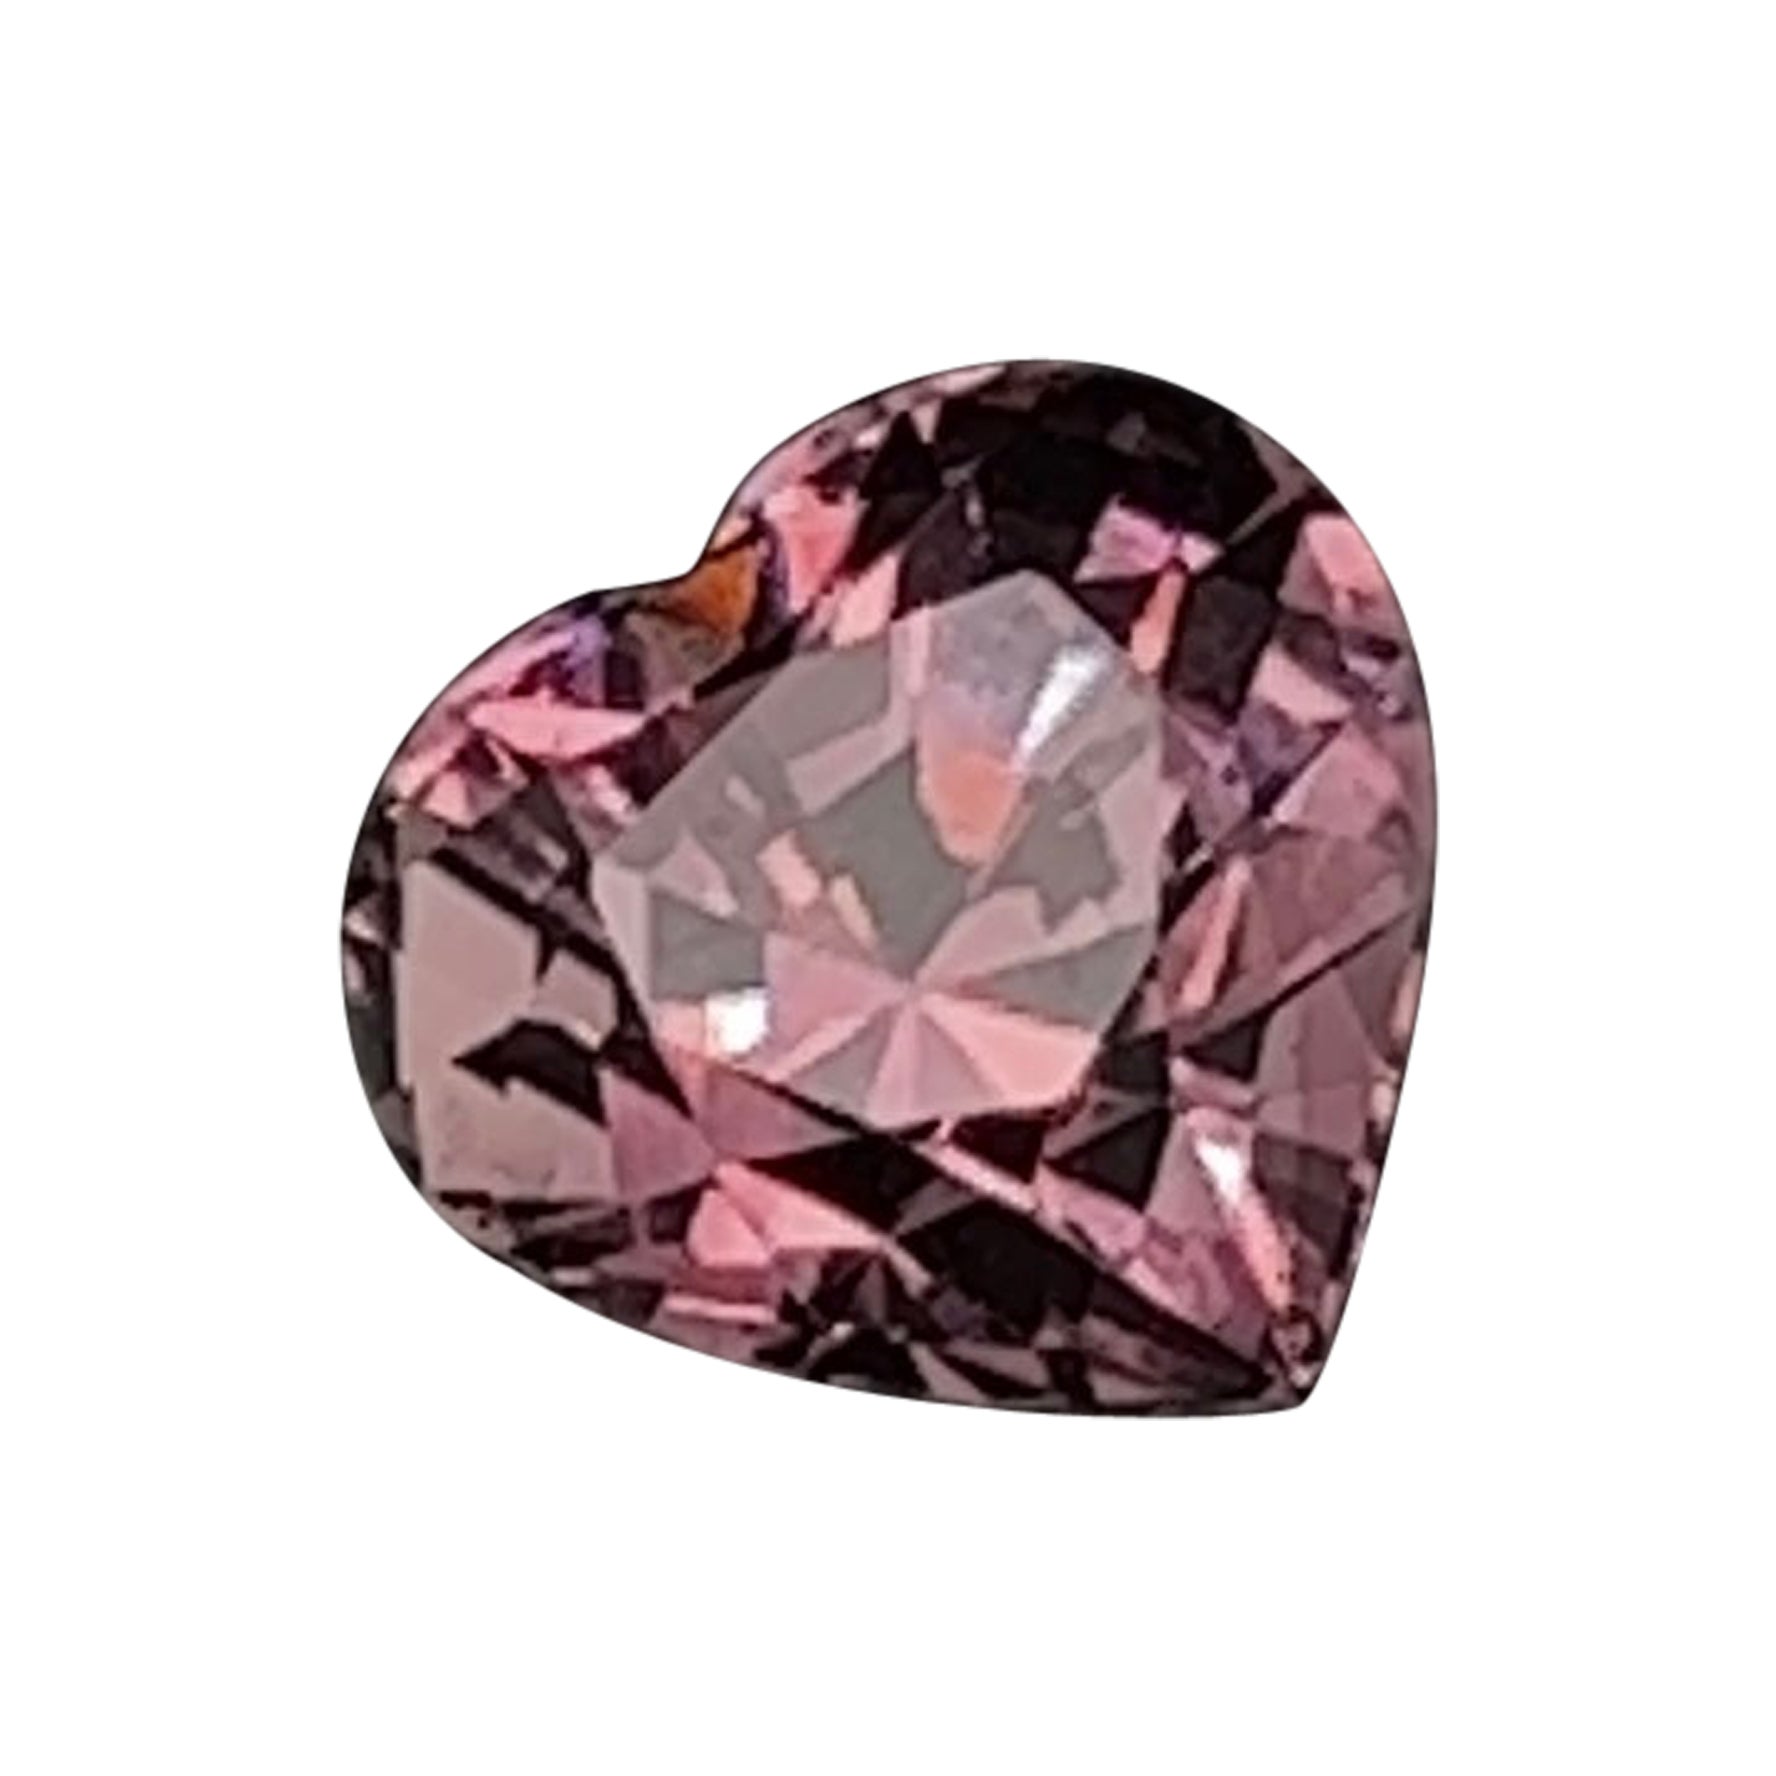 Pink Heart Tourmaline Loose Stone 2.92cts 'Many More' For Sale